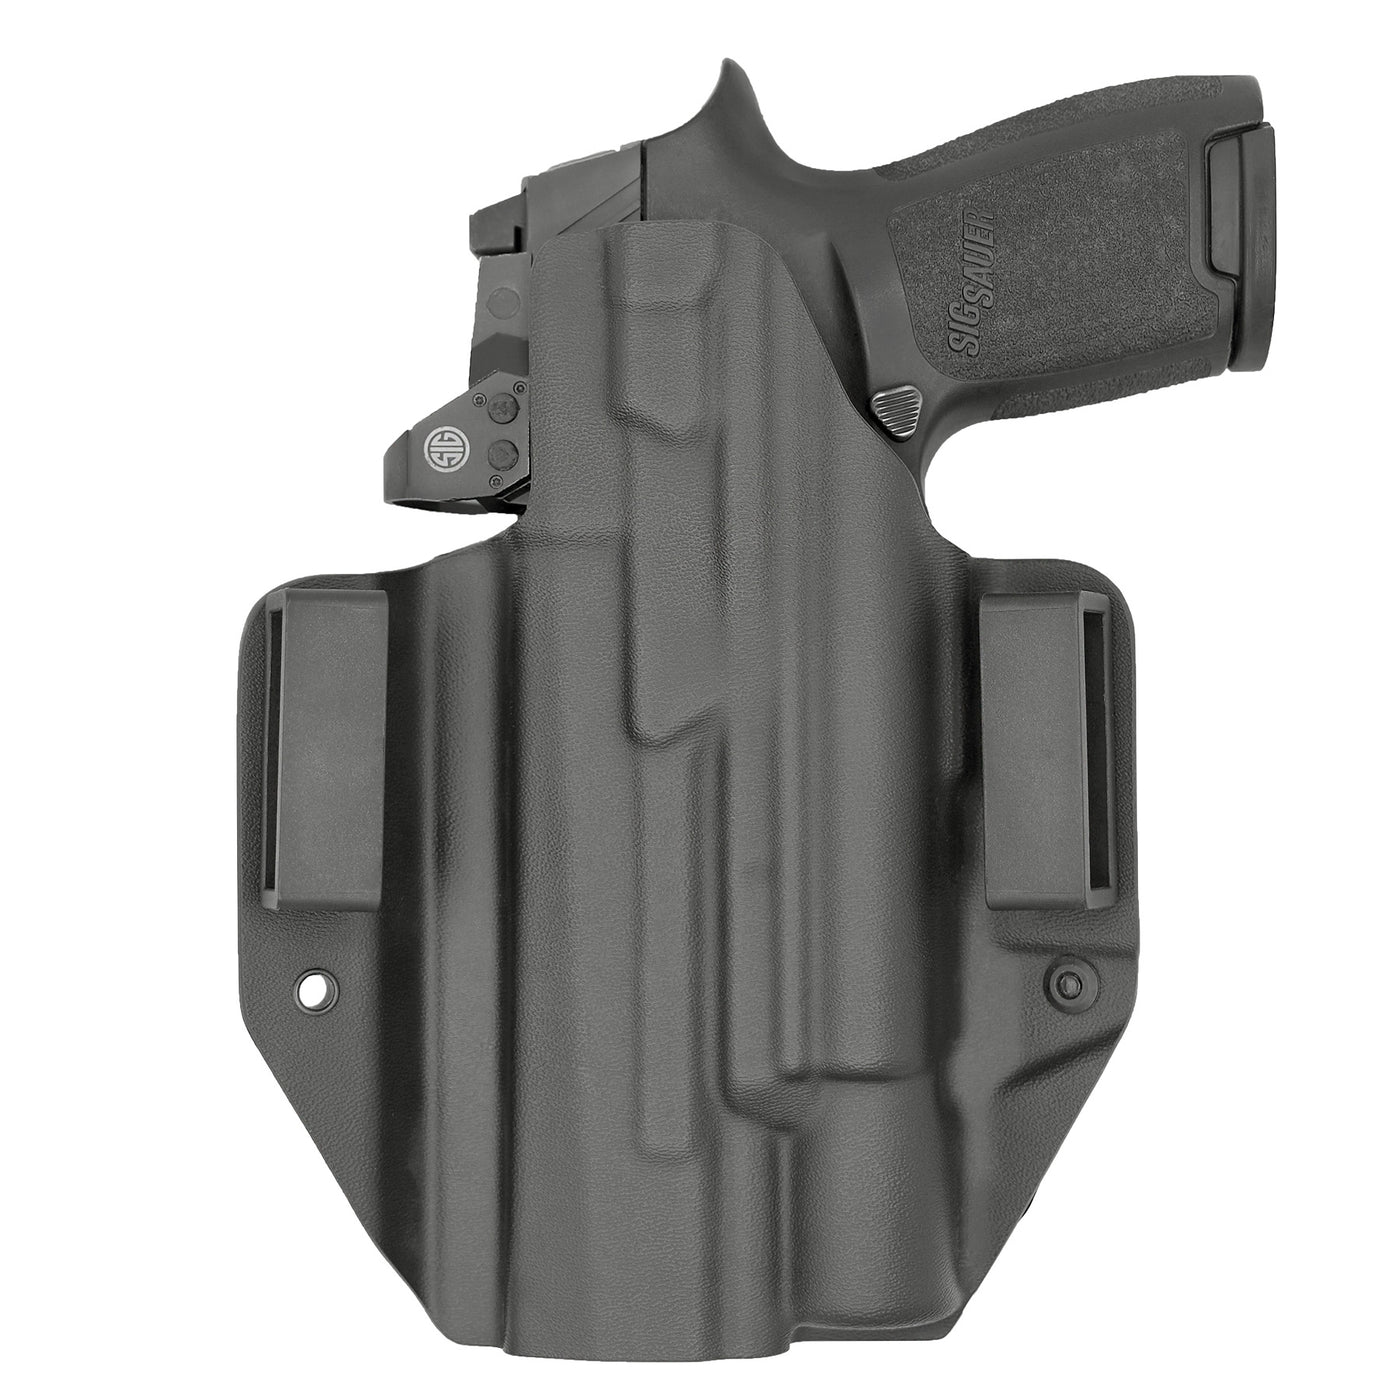 C&G holsters Quickship OWB Tactical Masada Surefire X300 in holstered position back view